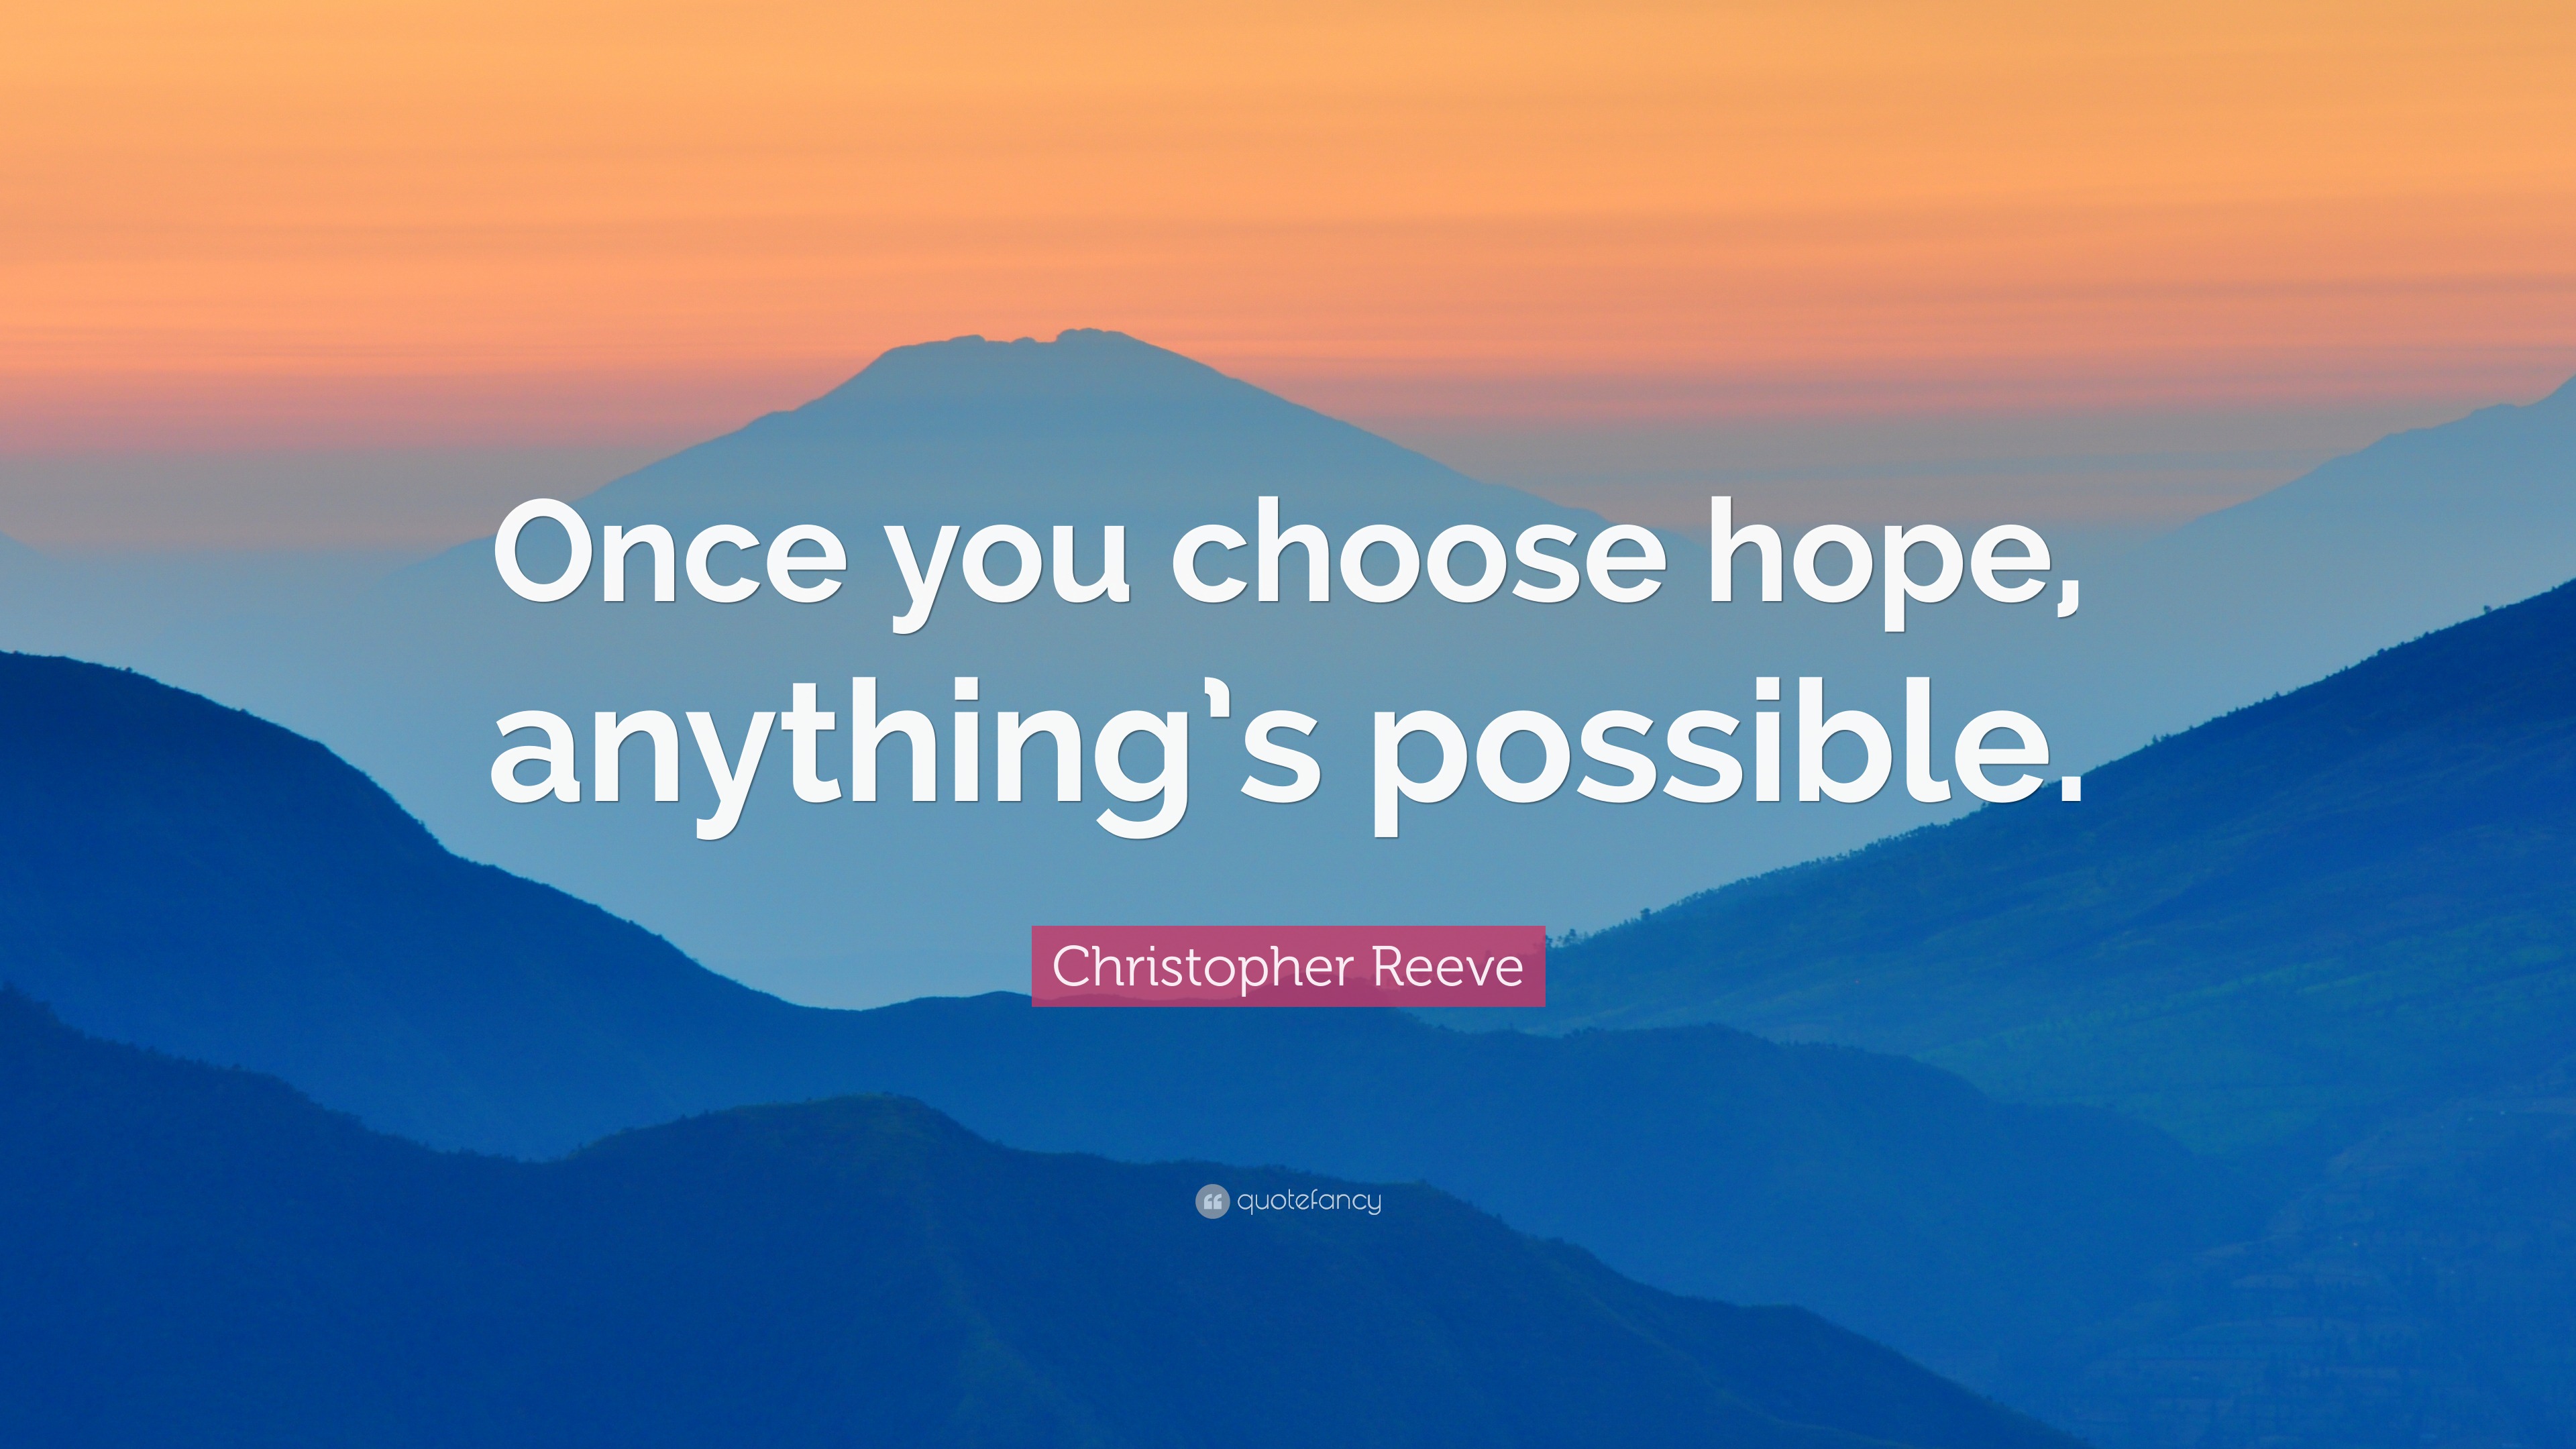 Christopher Reeve Quote: “Once you choose hope, anything’s possible.”